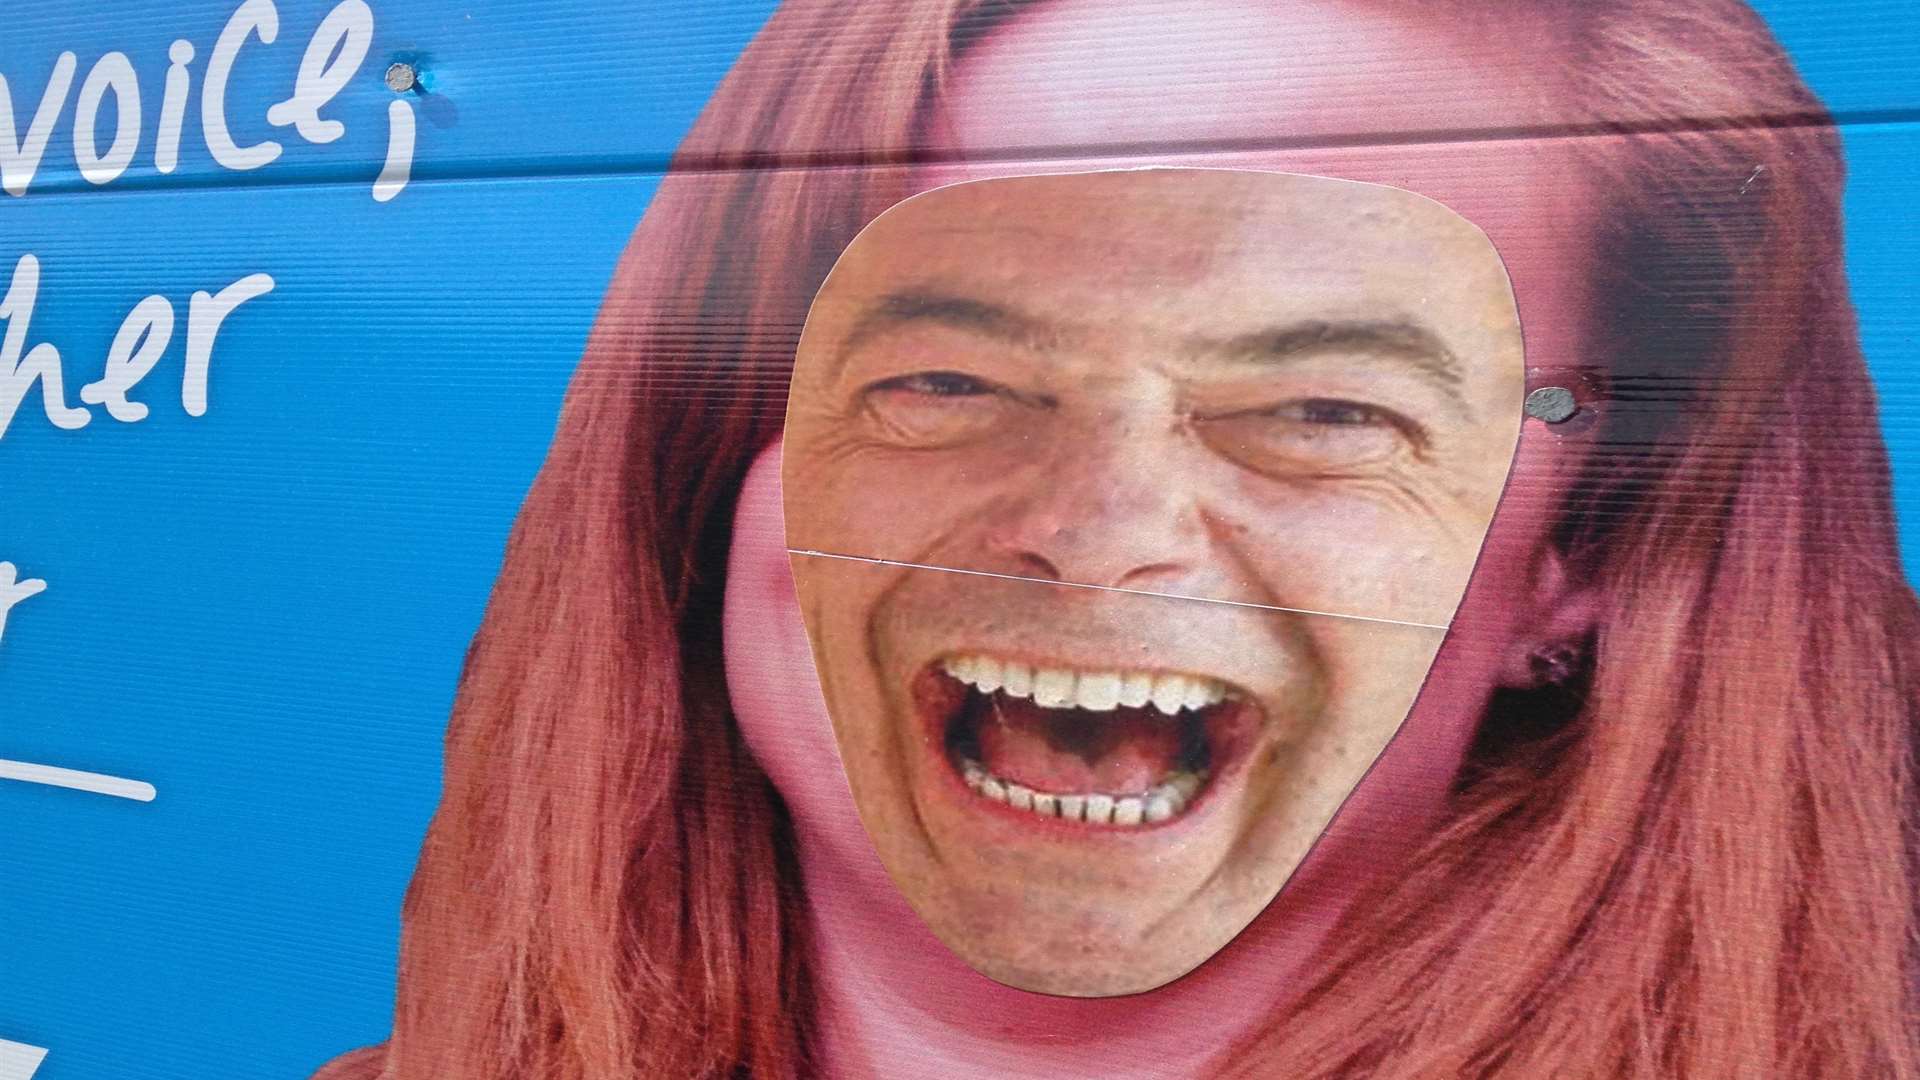 Nigel Farage's face has been put on top of Kelly Tolhurst's election sign.